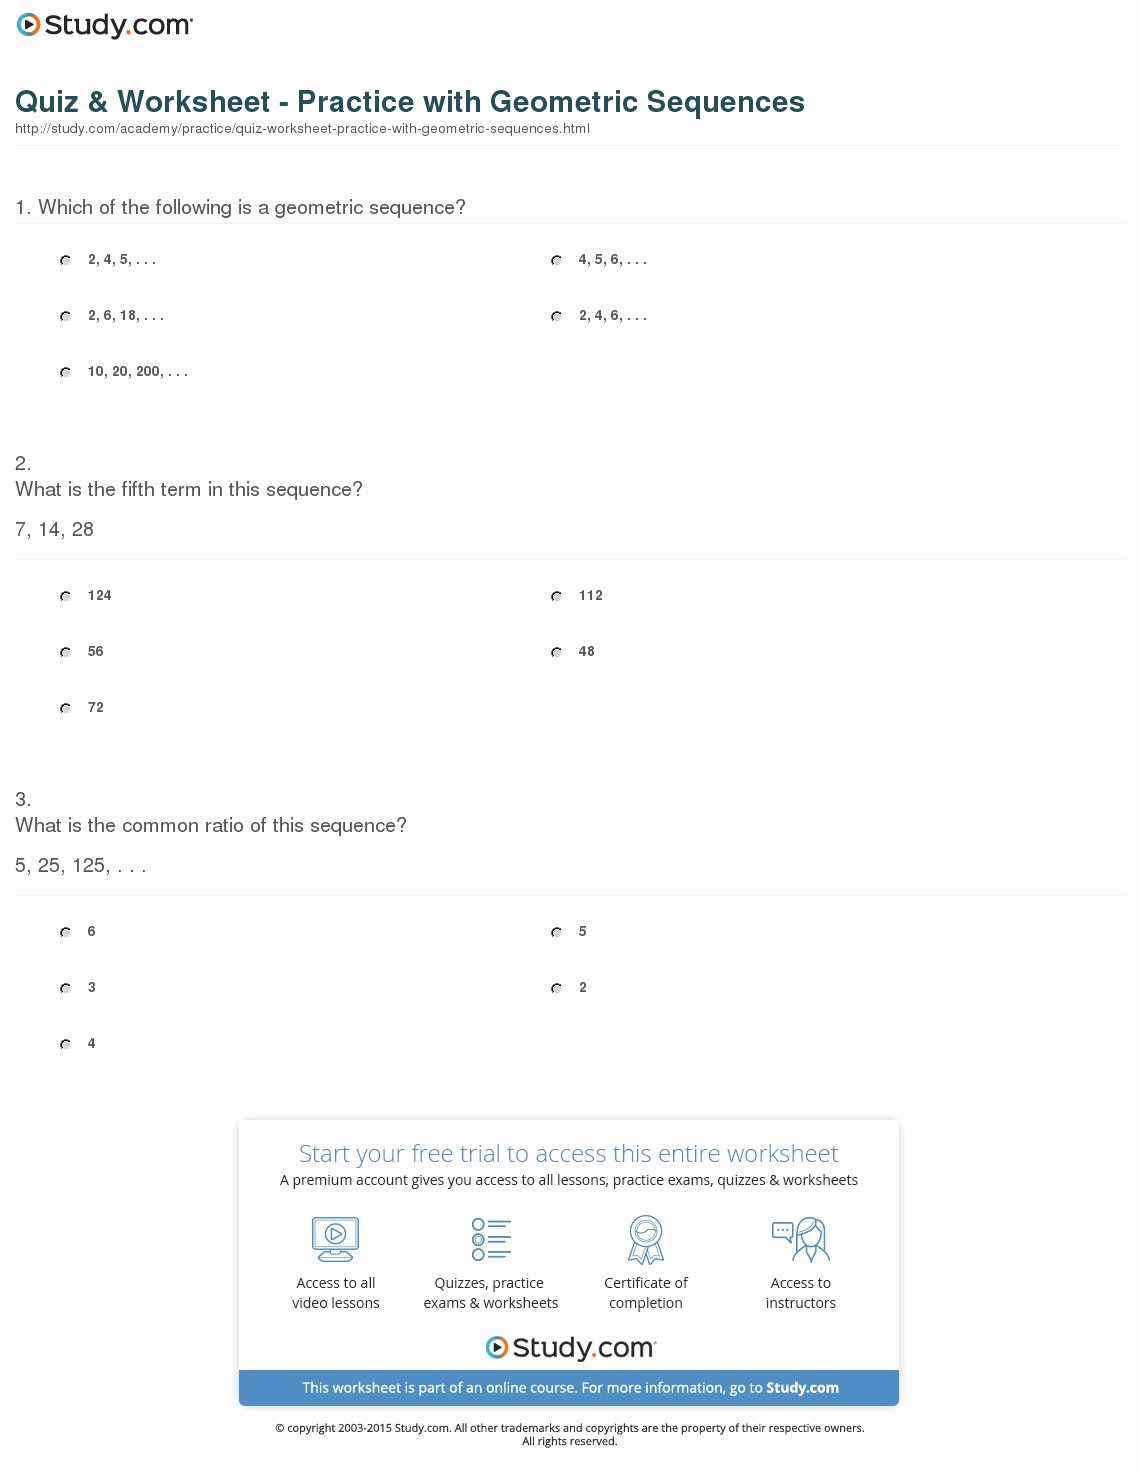 Geometric and Arithmetic Sequences Worksheet New Quiz &amp; Worksheet Practice with Geometric Sequences